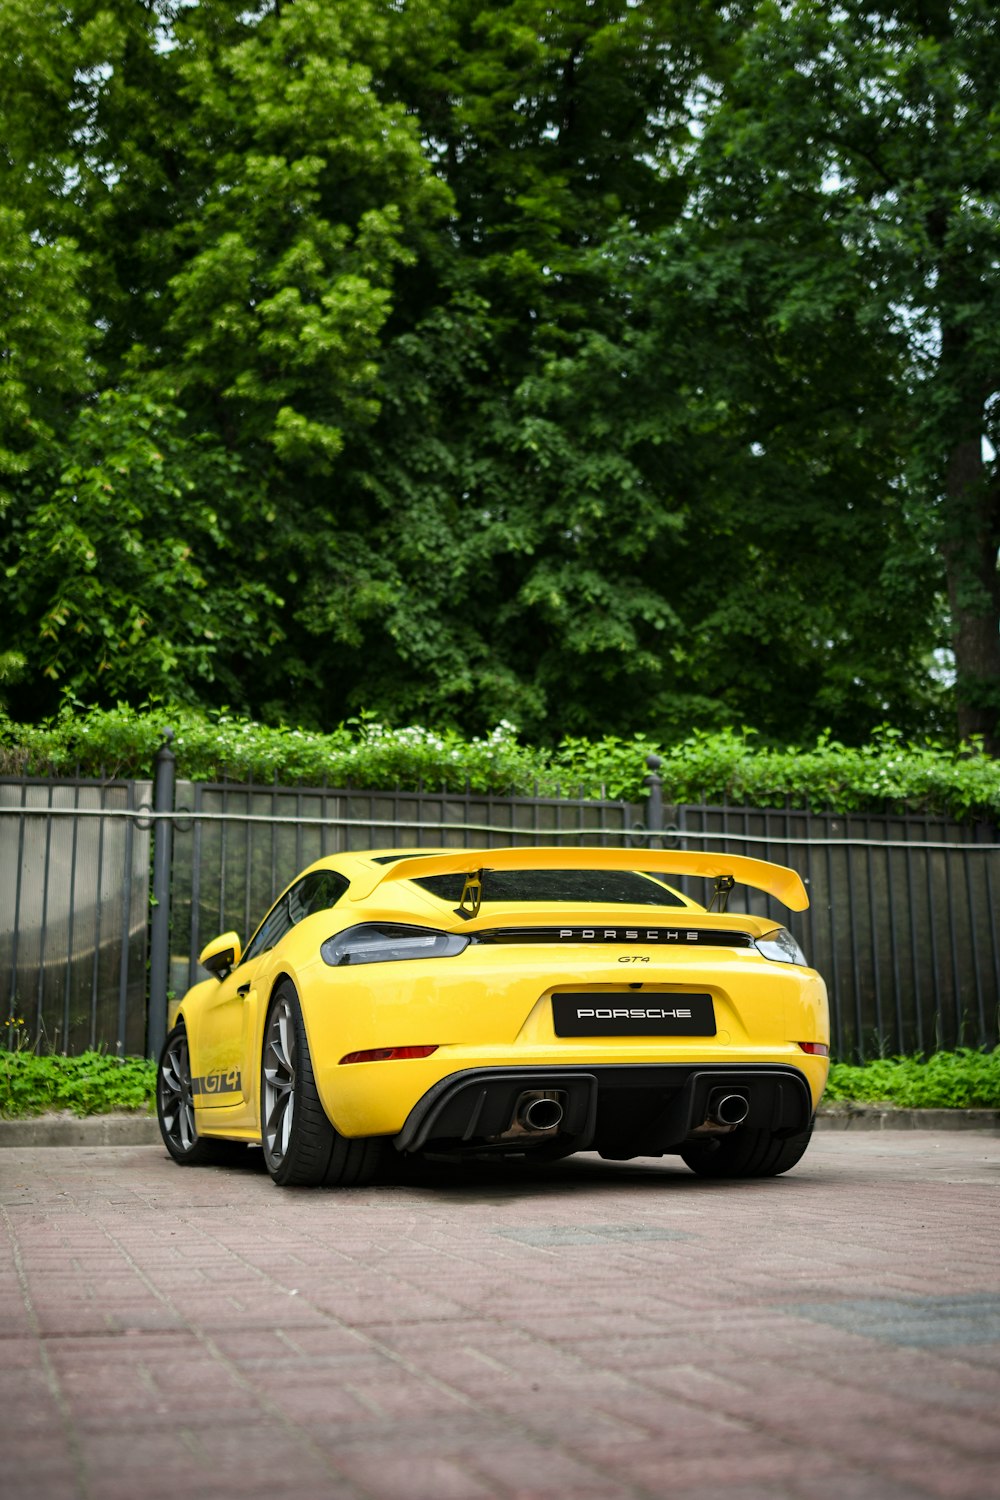 a yellow sports car parked in front of a fence